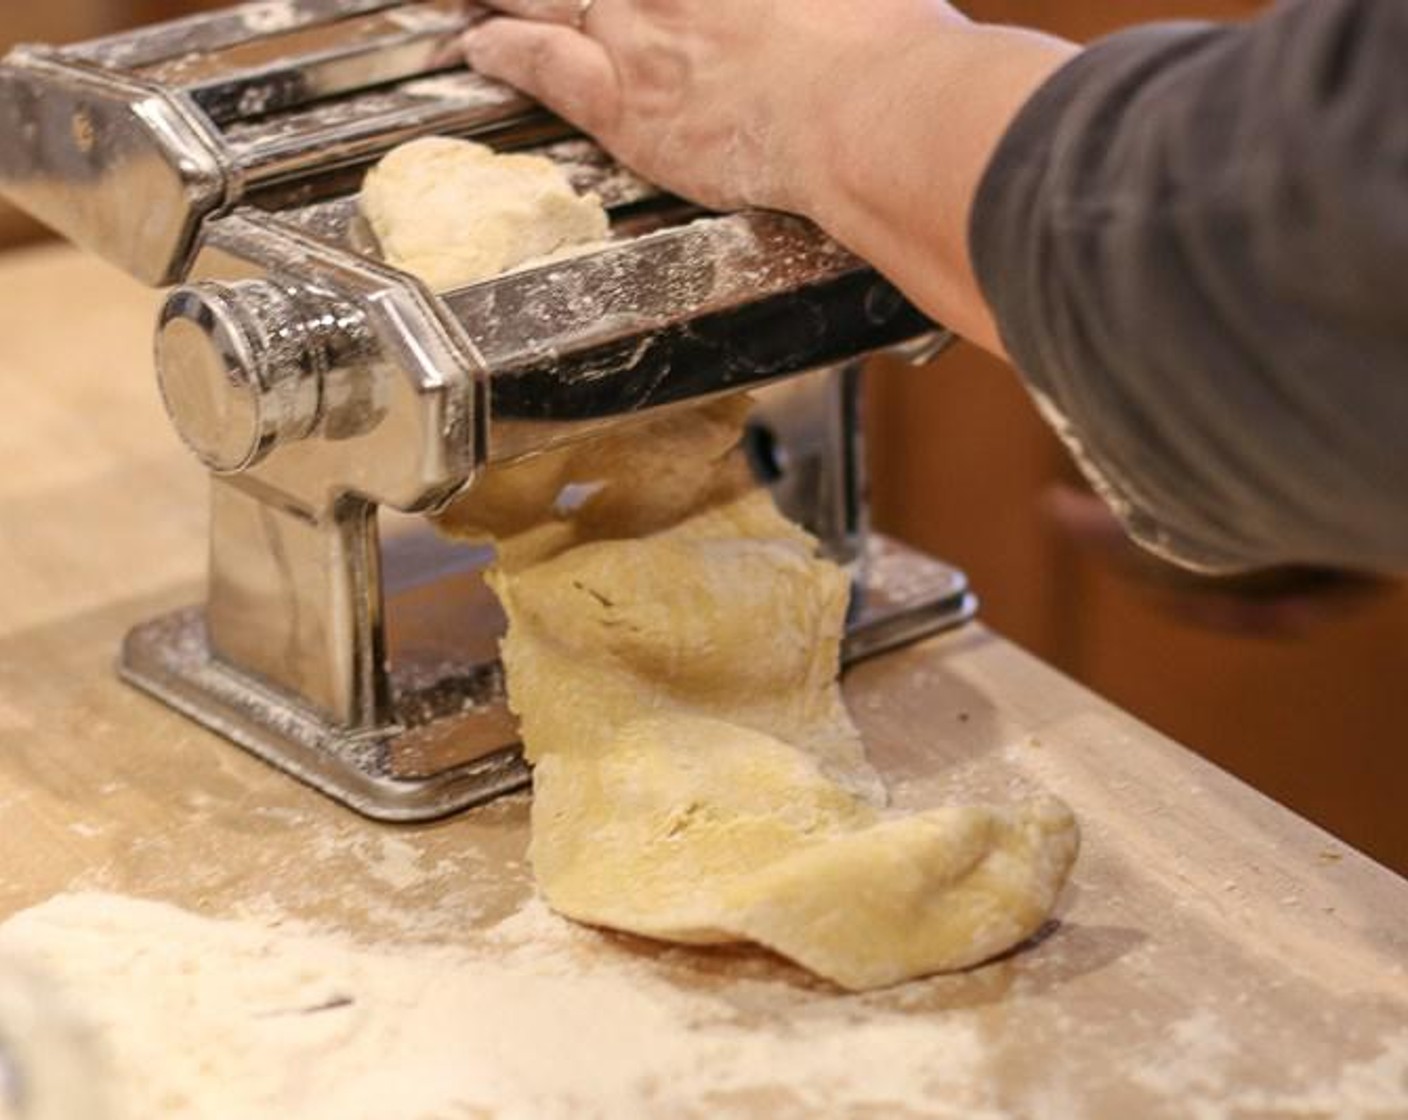 step 5 Run the dough through a floured pasta machine, with the flat rollers set to the most open setting. Roll it back through the pasta maker again. If the dough sticks, coat with a little more flour. Fold and roll the dough three more times, adjusting the machine to make the pasta thin.